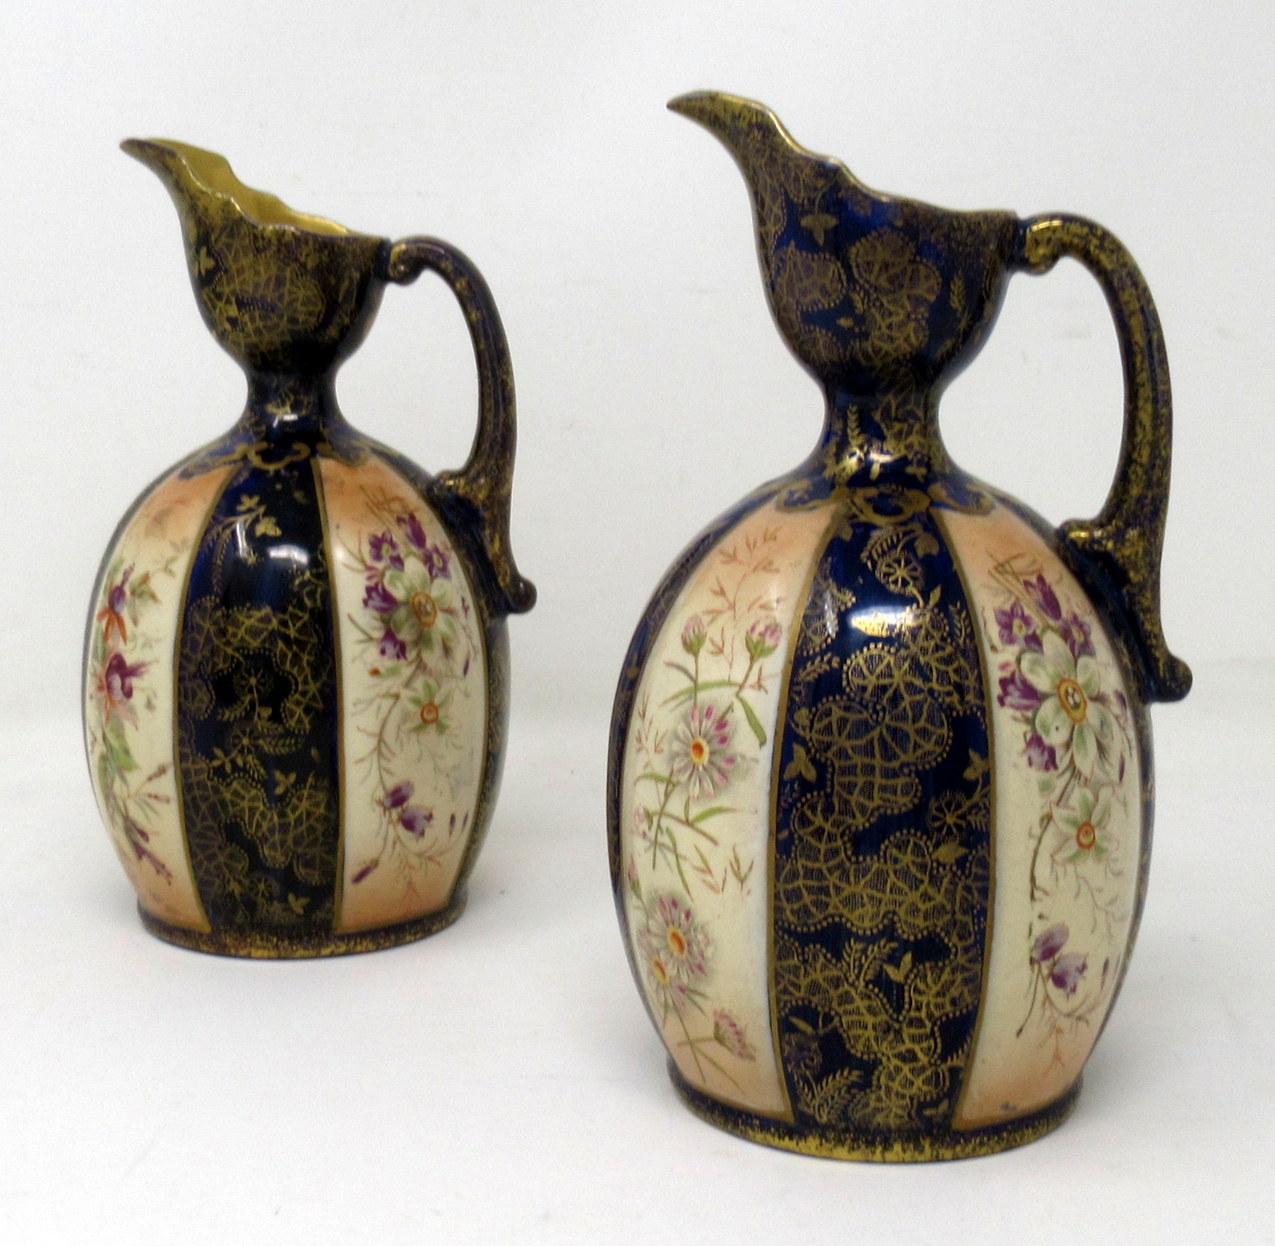 An unusual Pair of English Victorian Phoenix Ware Hand decorated porcelain Ewers made in Staffordshire, England by Thomas Forester & Sons with date mark used for period 1891-1912 

Each of ovoid outline with applied C scroll handle and gilded